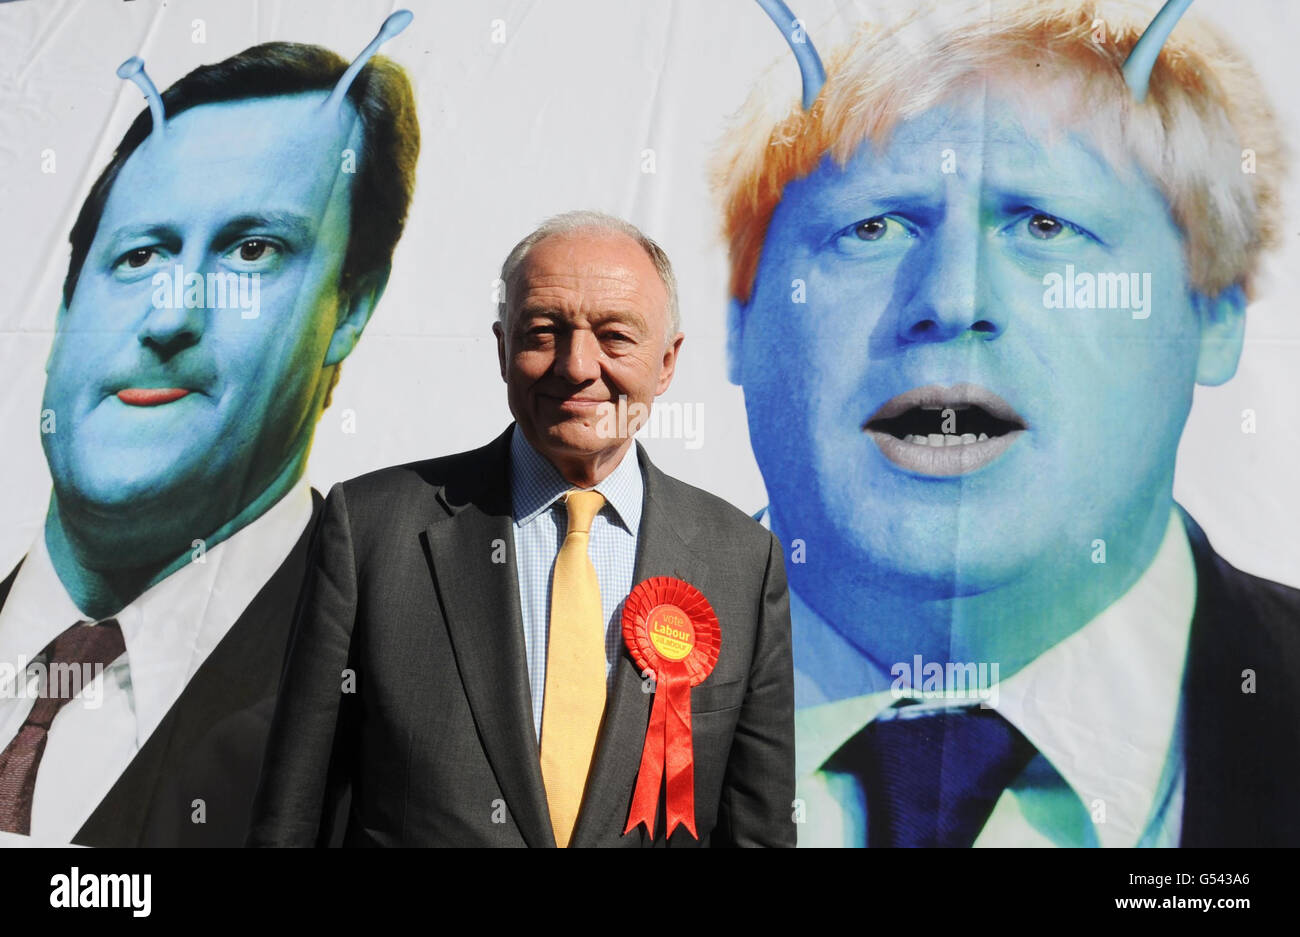 London Mayoral candidate Ken Livingstone at the launch in south London of a poster supporting his campaign to be Mayor of London today. Stock Photo